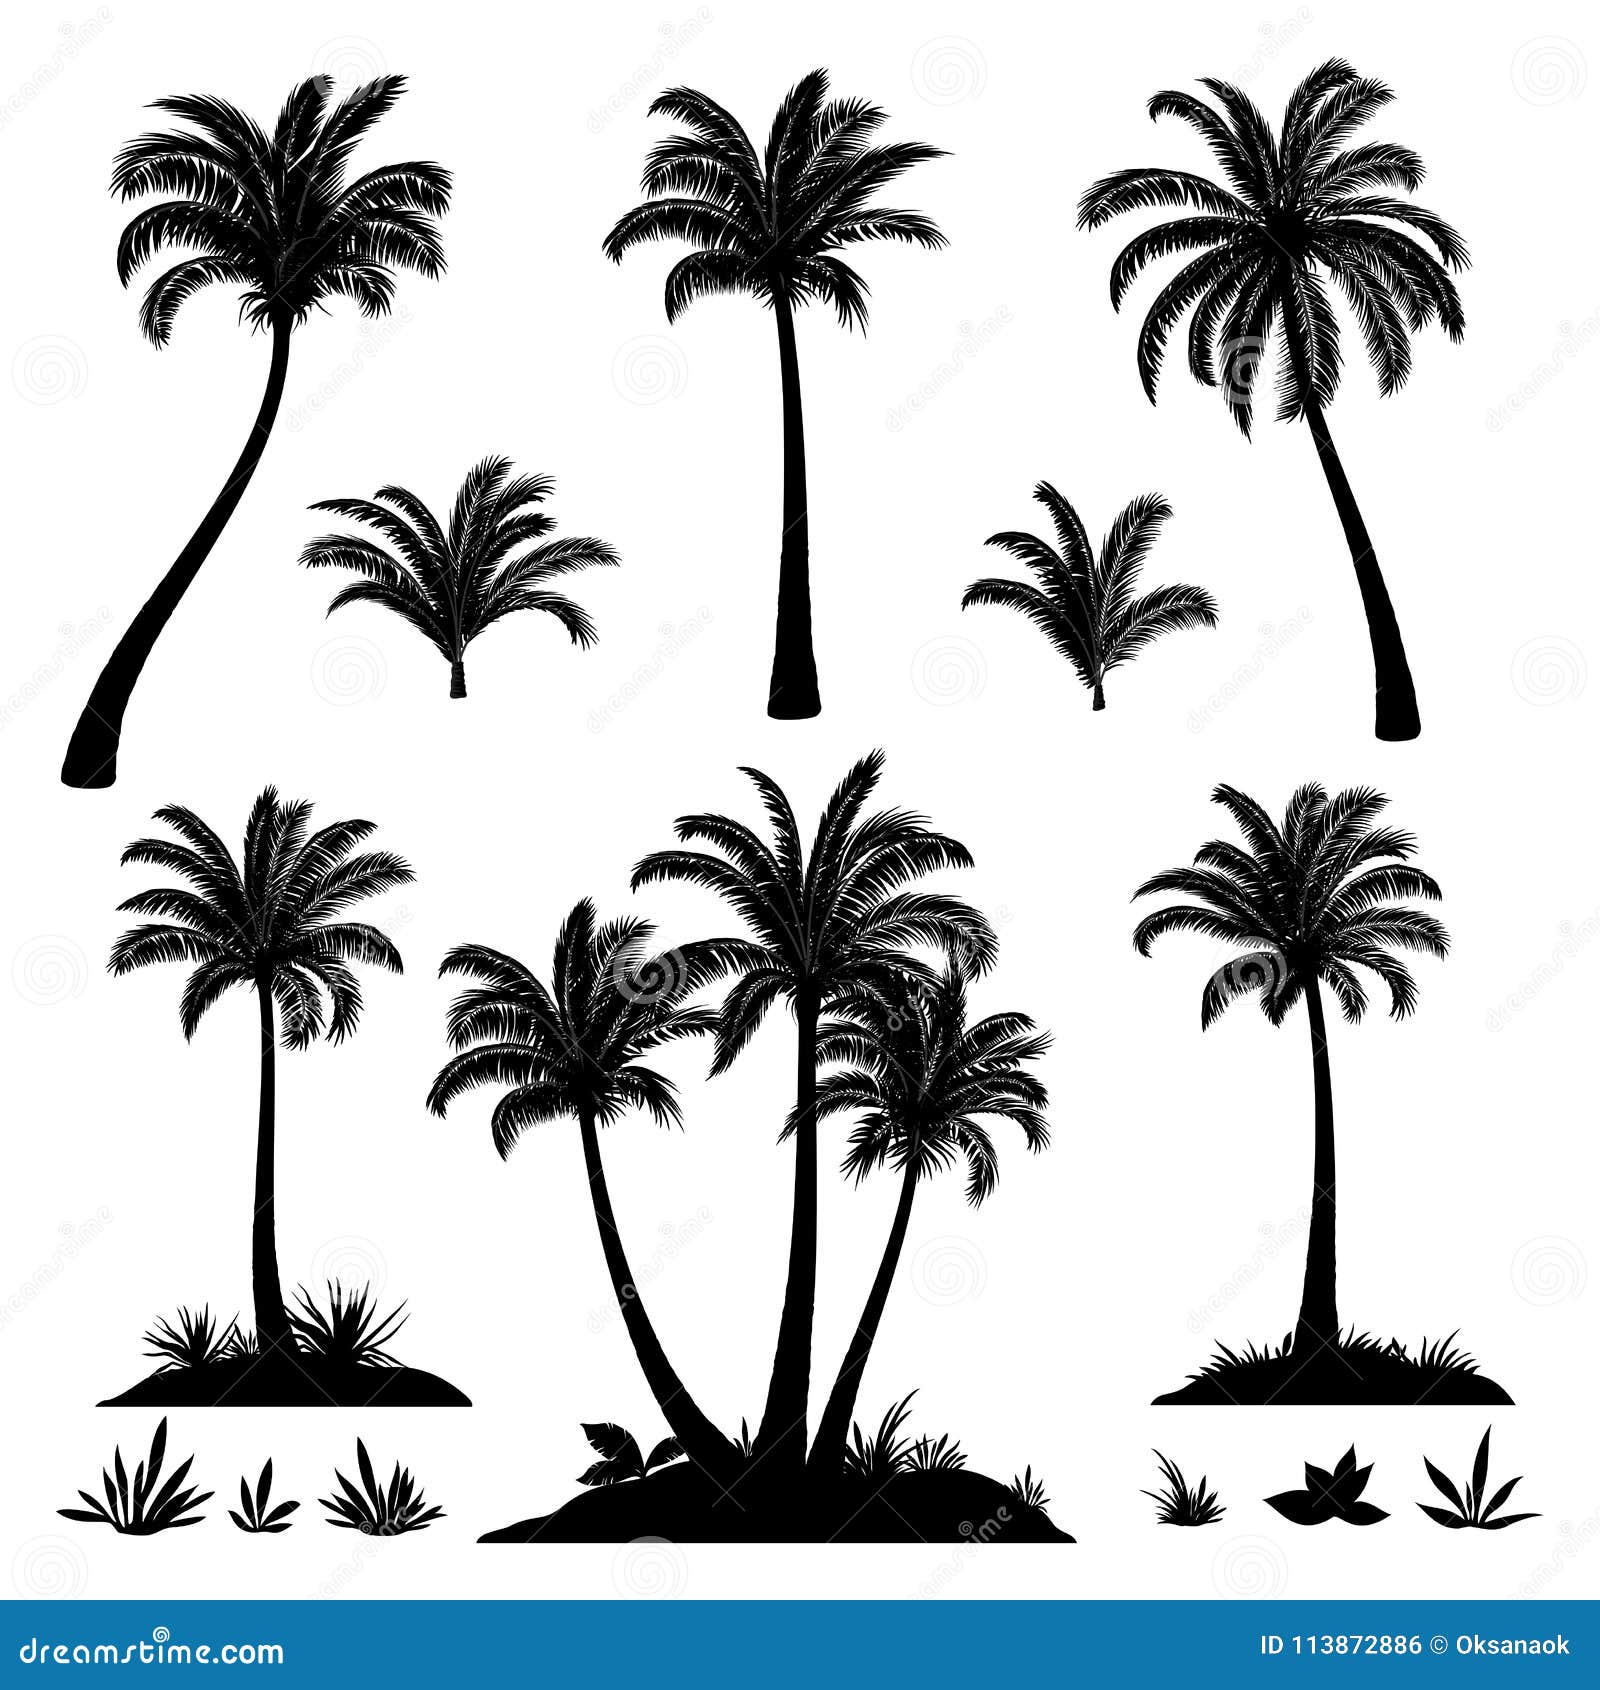 2200 Row Of Palm Trees Illustrations RoyaltyFree Vector Graphics  Clip  Art  iStock  Los angeles Palm trees beach Pacific coast highway